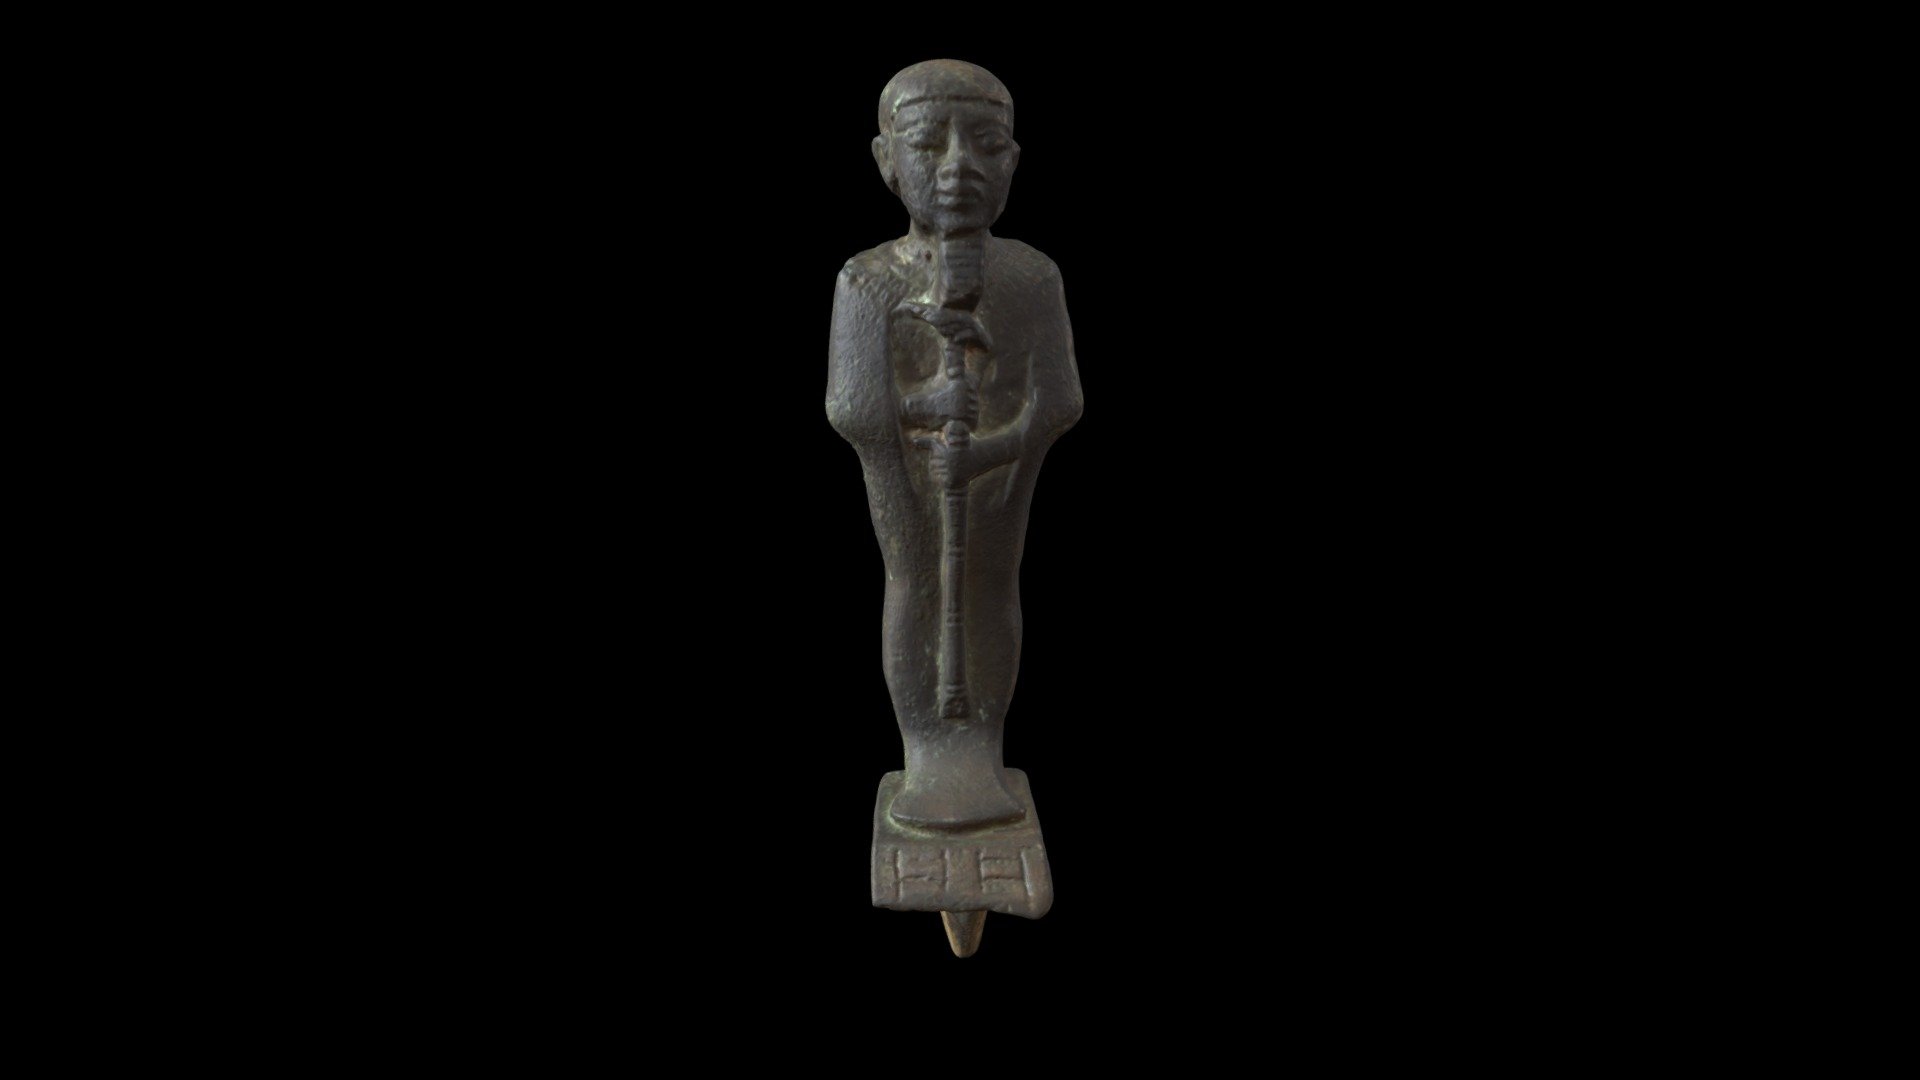 Egypt

Late Period, c. 712-332 BC

Copper Alloy

SM1931.3.43

Scanned by Andréa Martinez with the Artec Spider 3D Scanner - Ptah Figurine - 3D model by Harvard Museum of the Ancient Near East (@hmane) 3d model